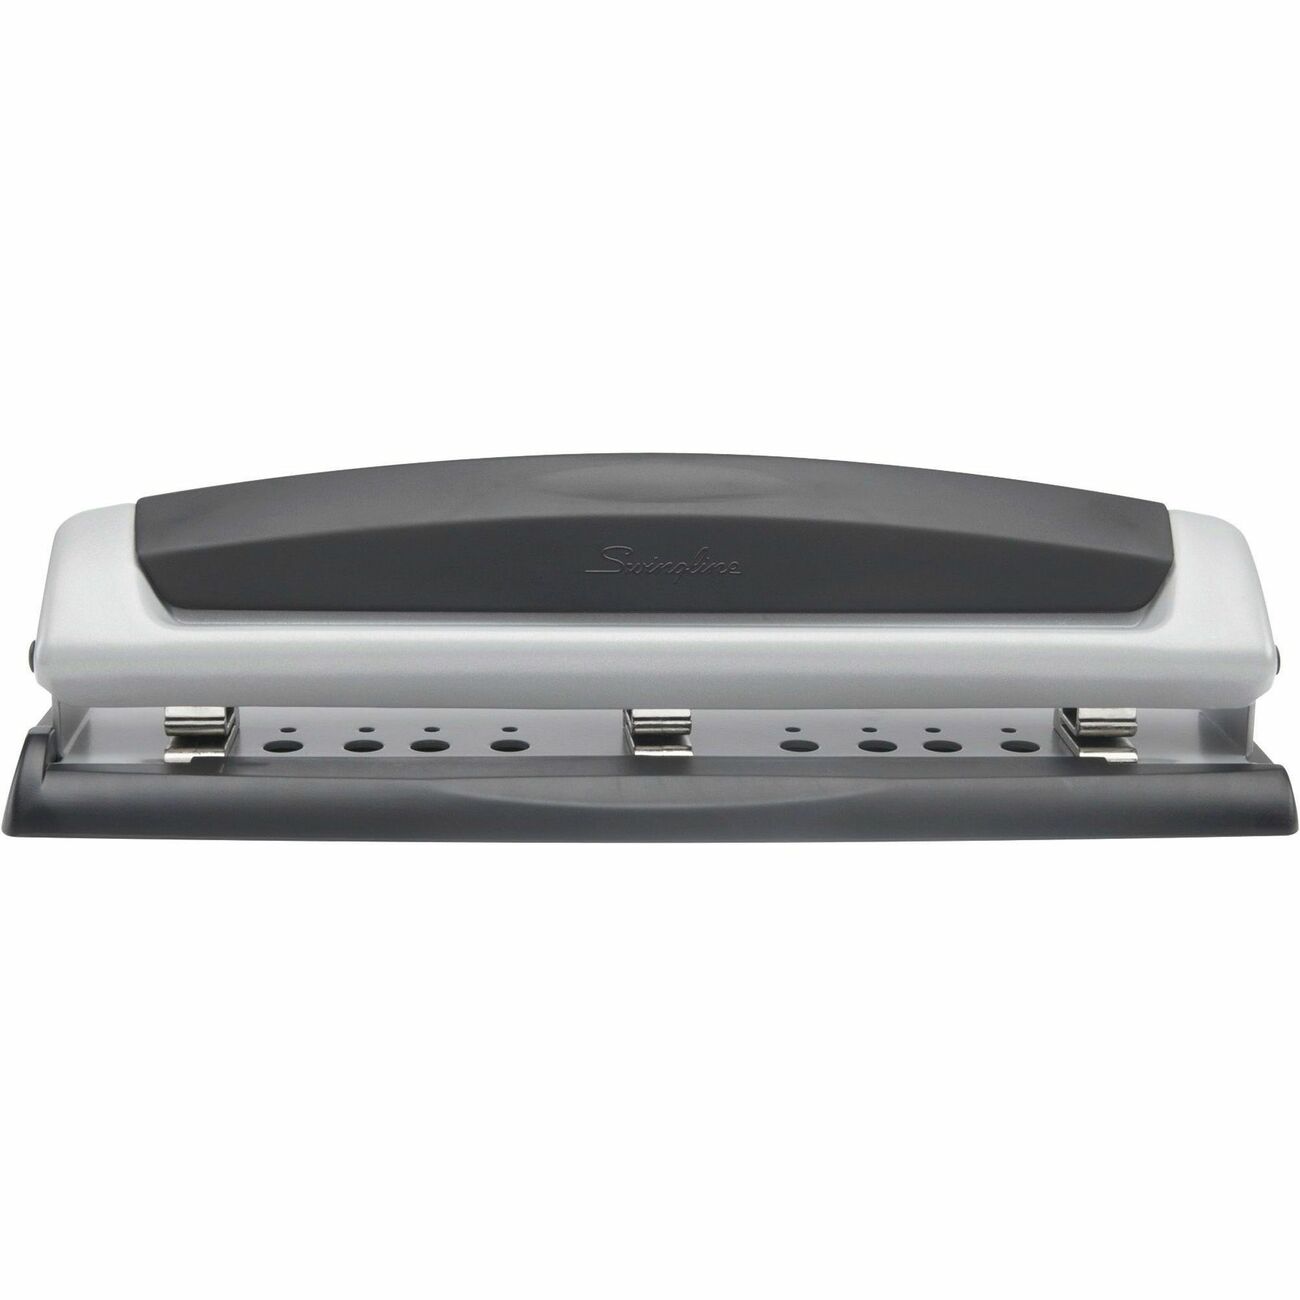 Swingline 3 Hole Punch, Desktop Hole Puncher 3 Ring, Smarttouch Metal Paper  Punch, Office Supplies, Portable Desk Accessorie - 3 Hole Punch, Desktop Hole  Puncher 3 Ring, Smarttouch Metal Paper Punch, Office